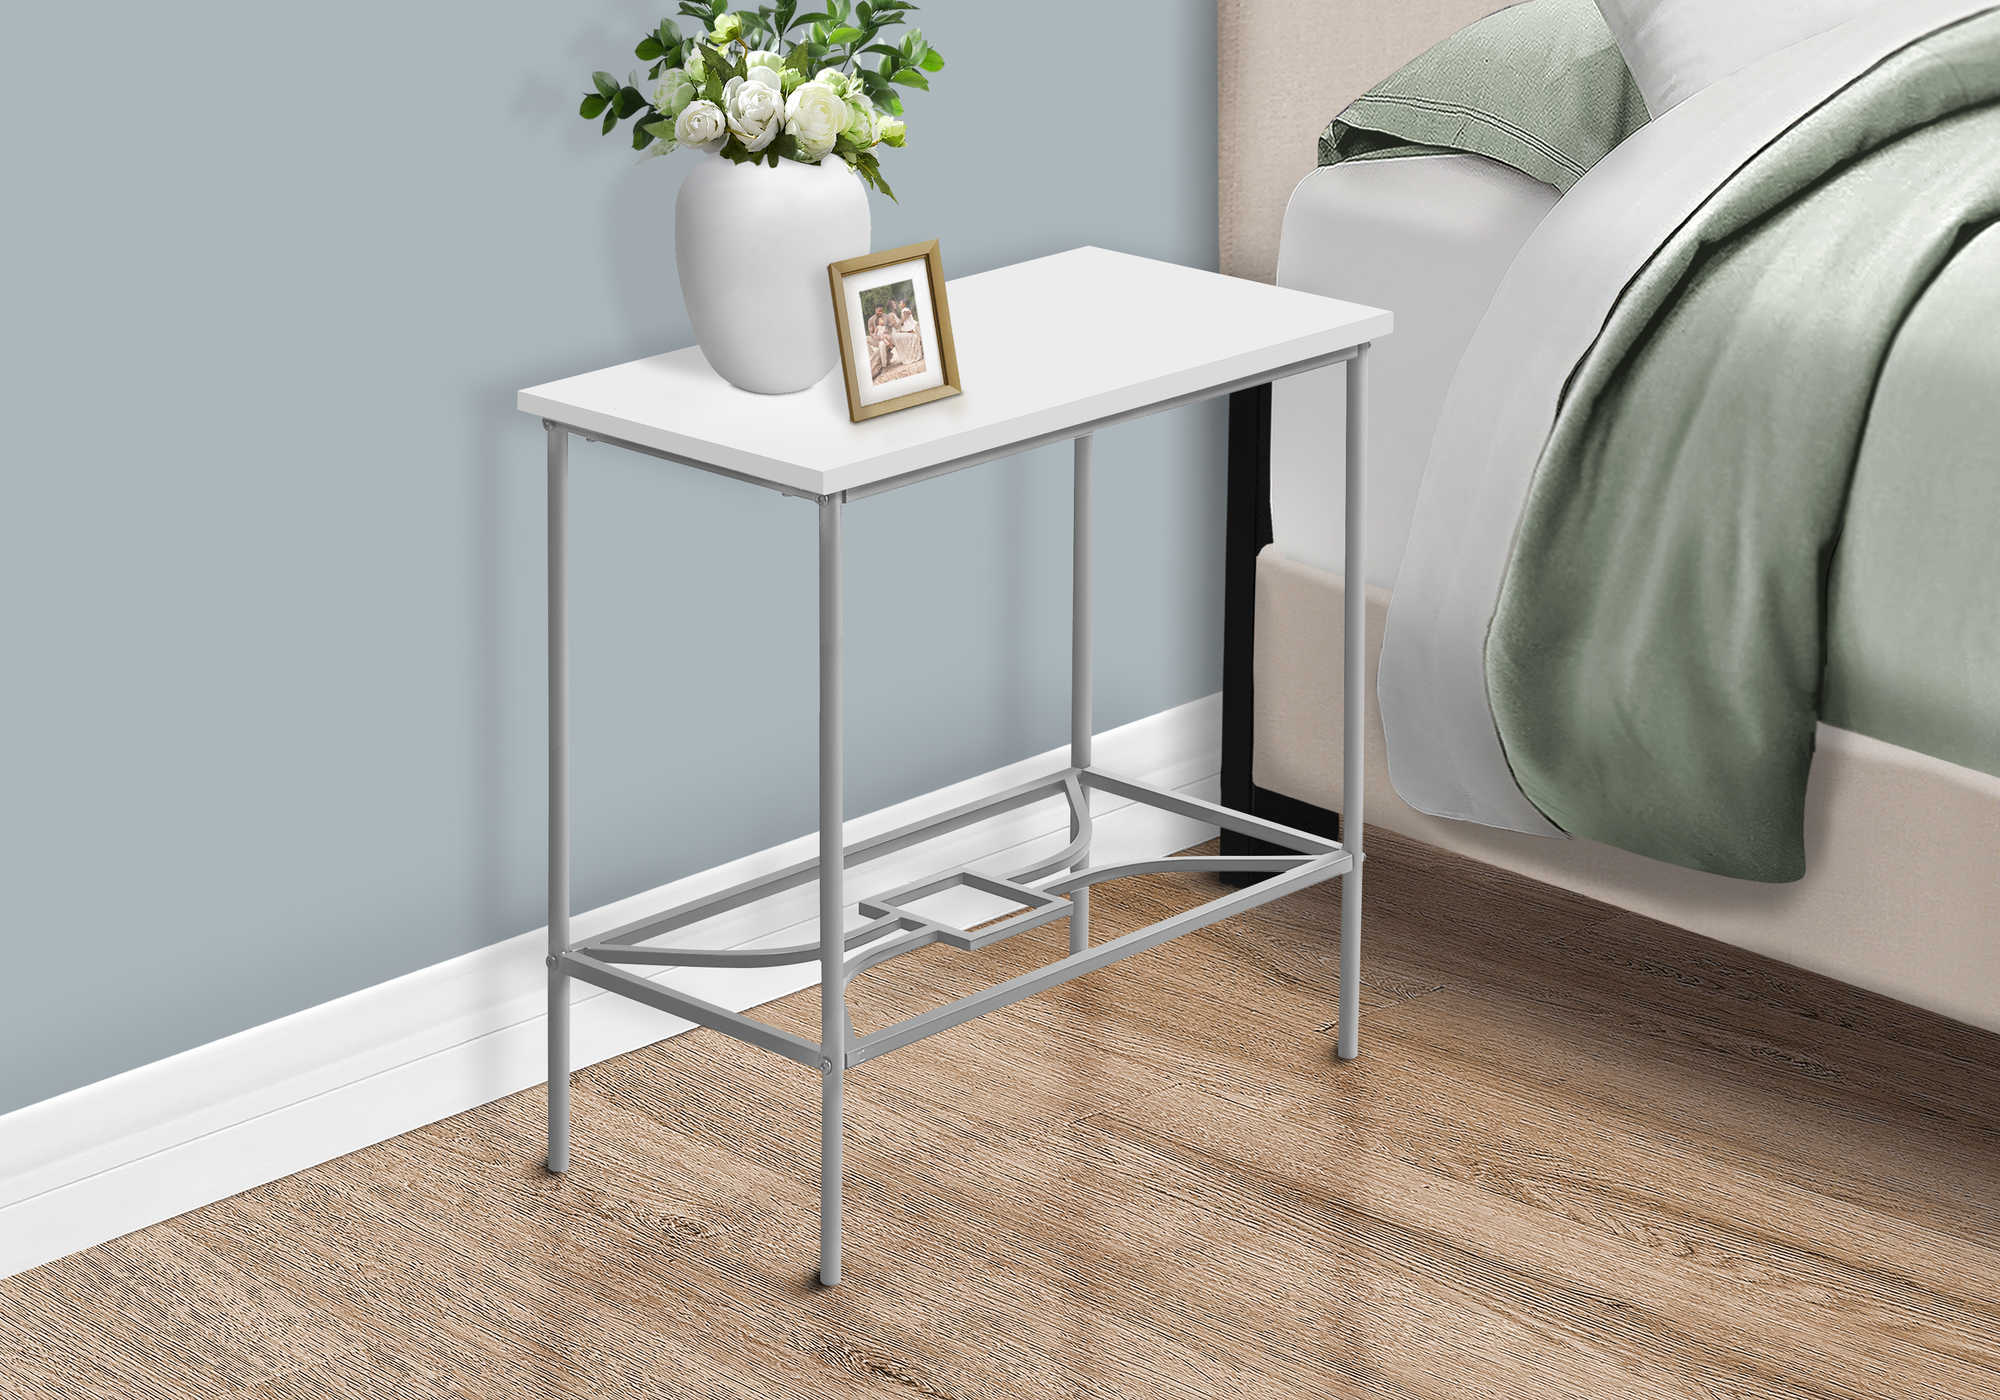 NIGHTSTAND - 22"H / WHITE / SILVER METAL